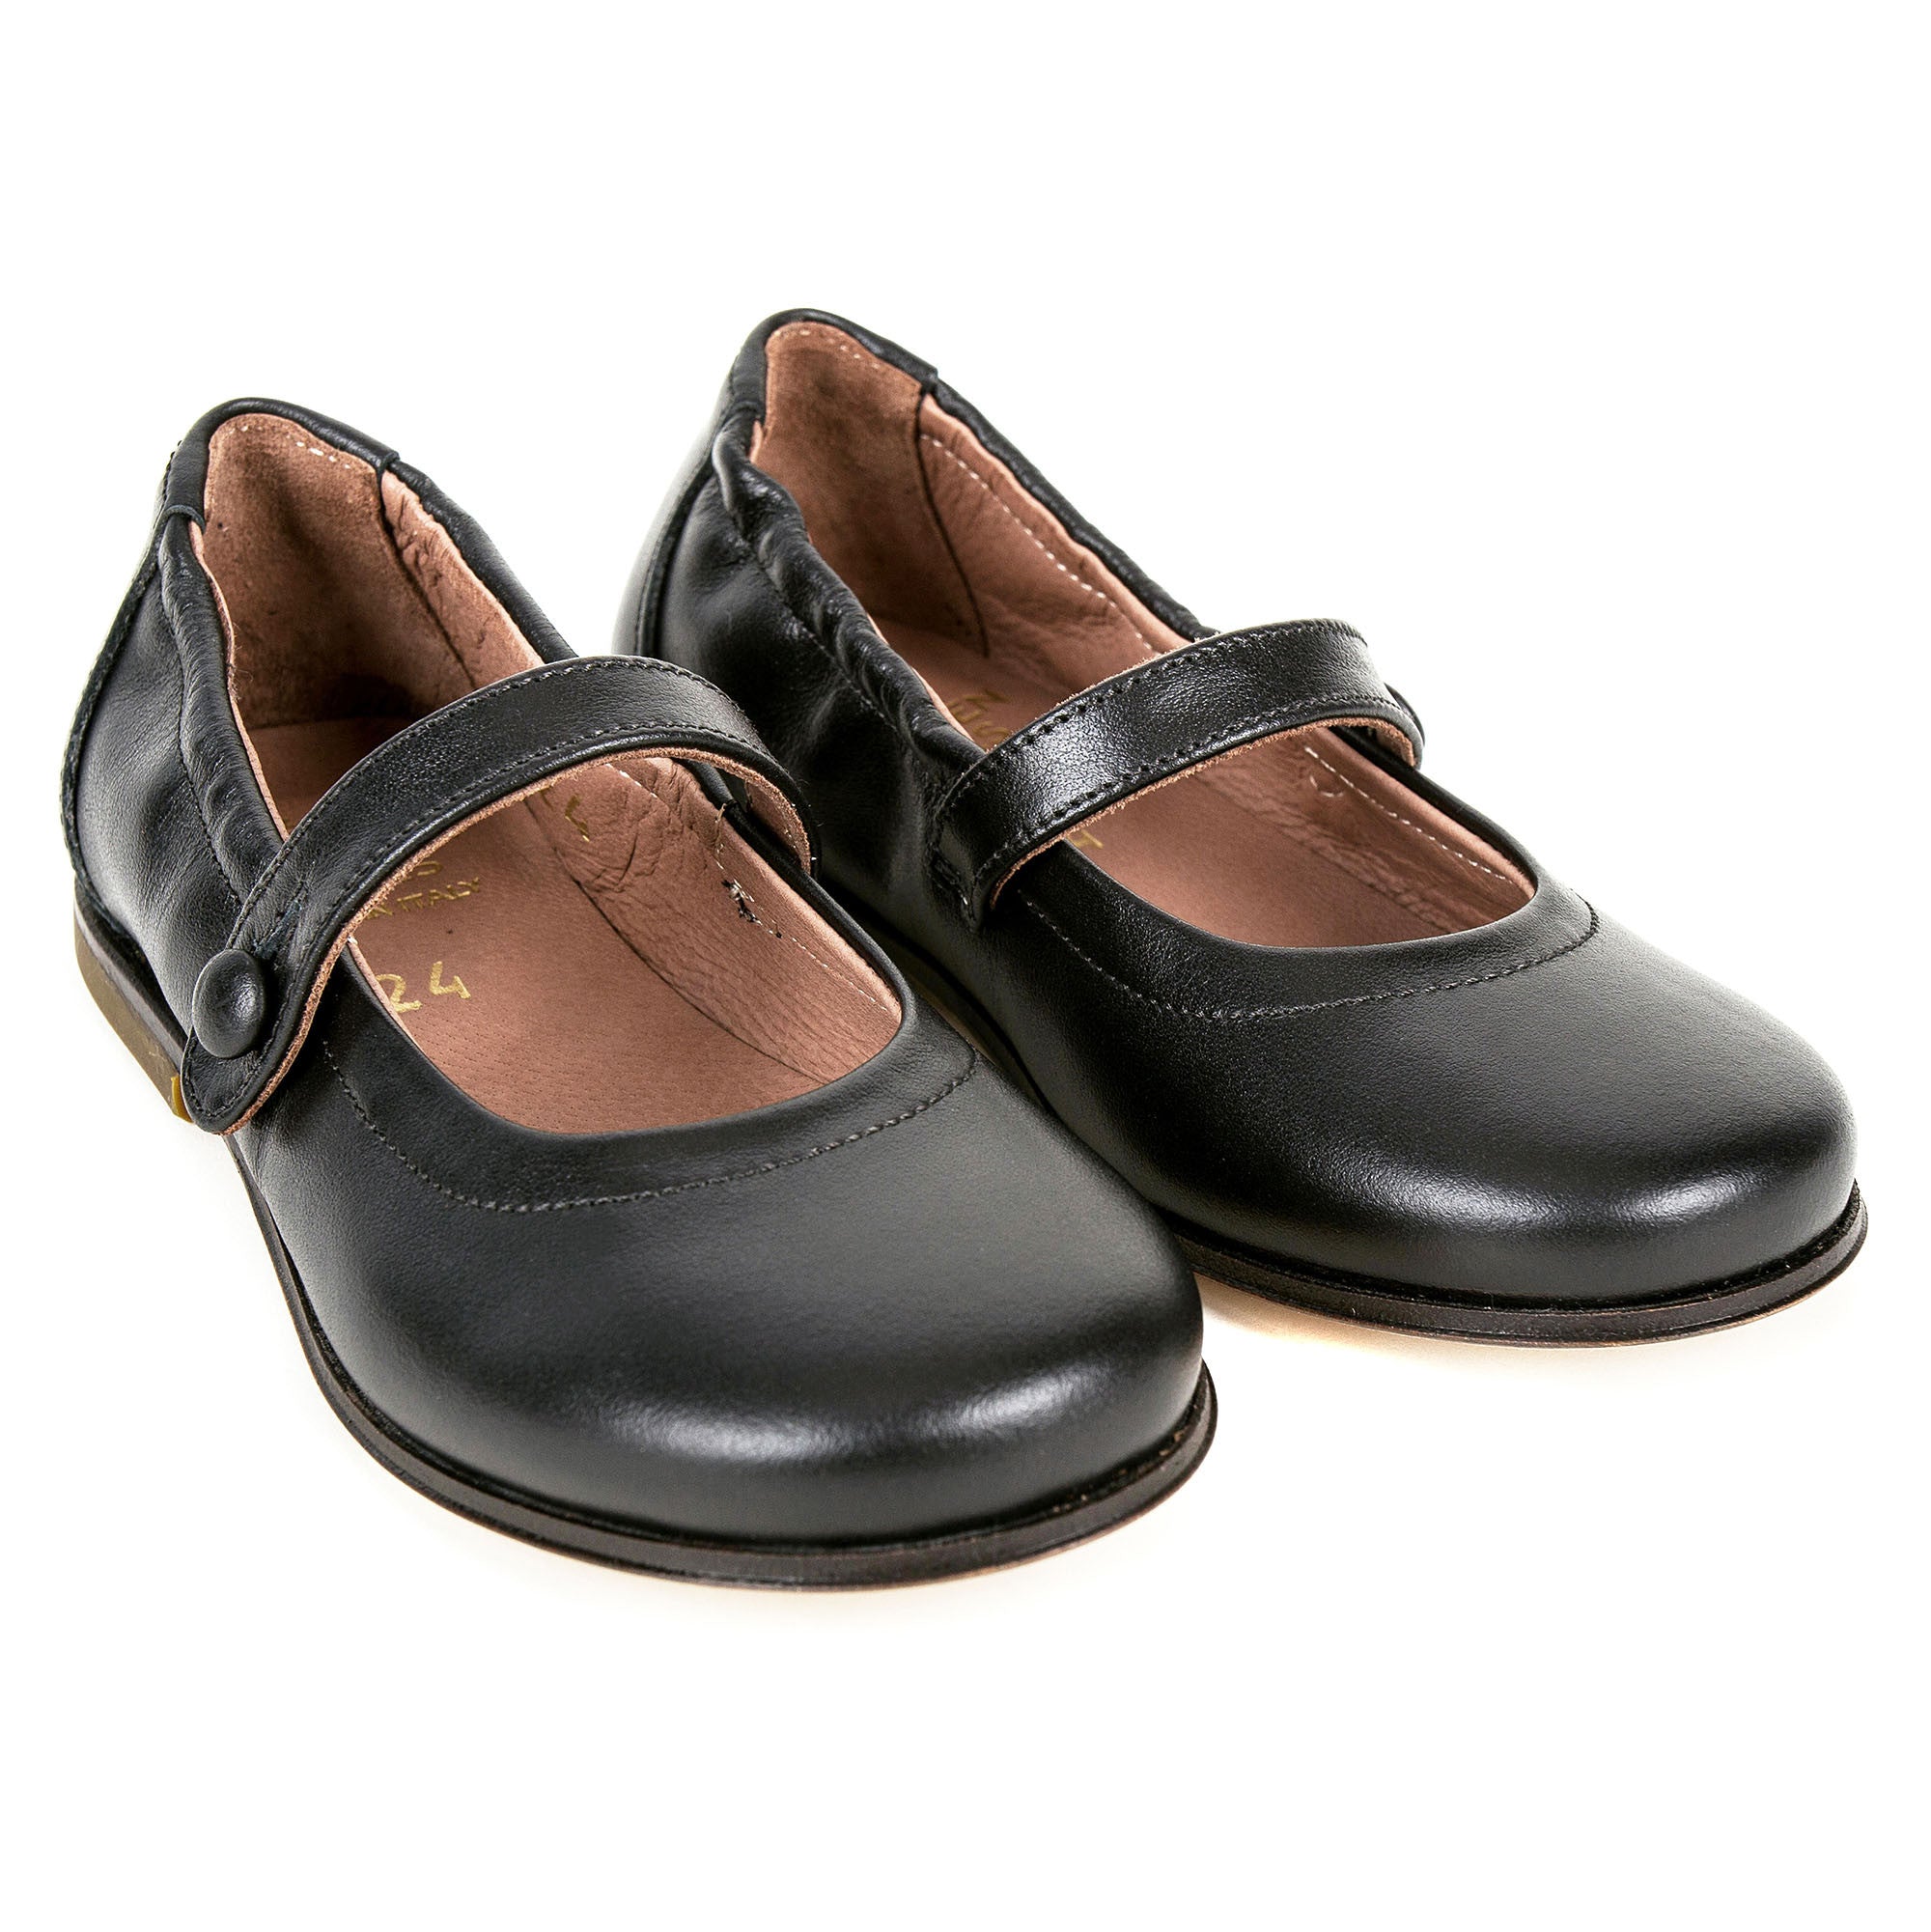 Girls Black Cowskin Leather Shoes